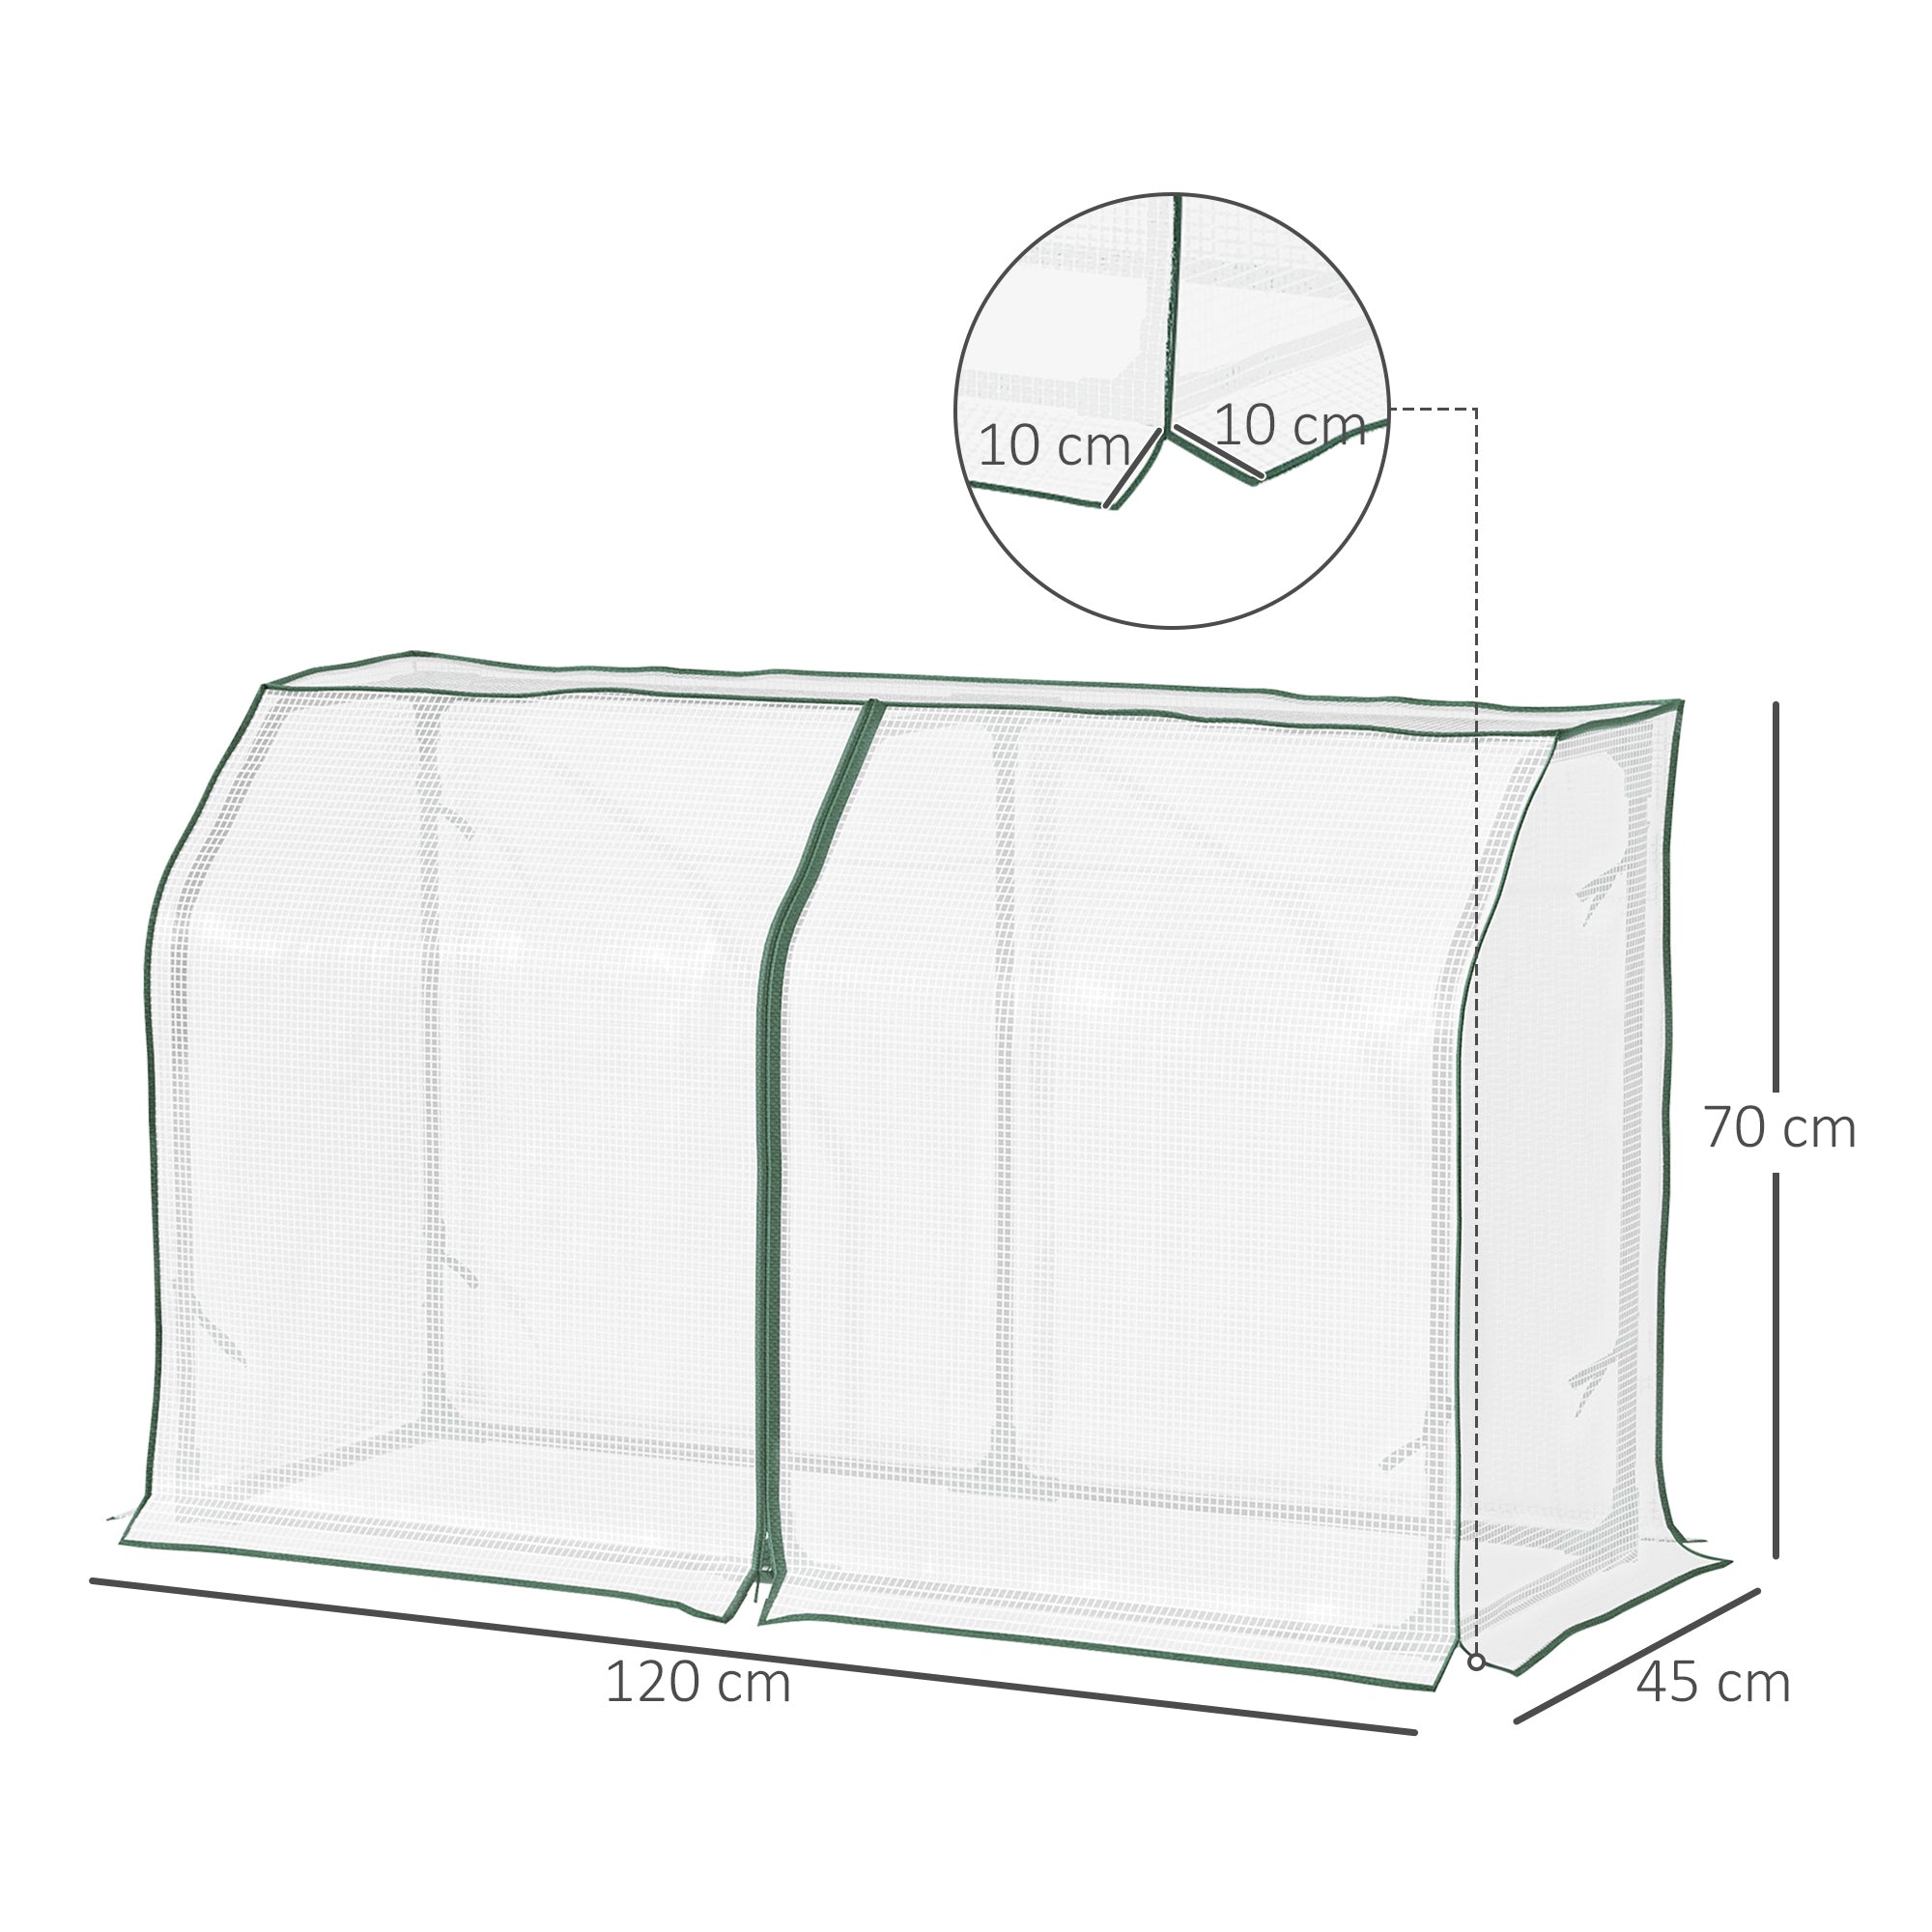 Mini Greenhouse Portable Garden Growhouse for Plants with Zipper Design for Outdoor, Indoor, 120 x 45 x 70cm, White-2